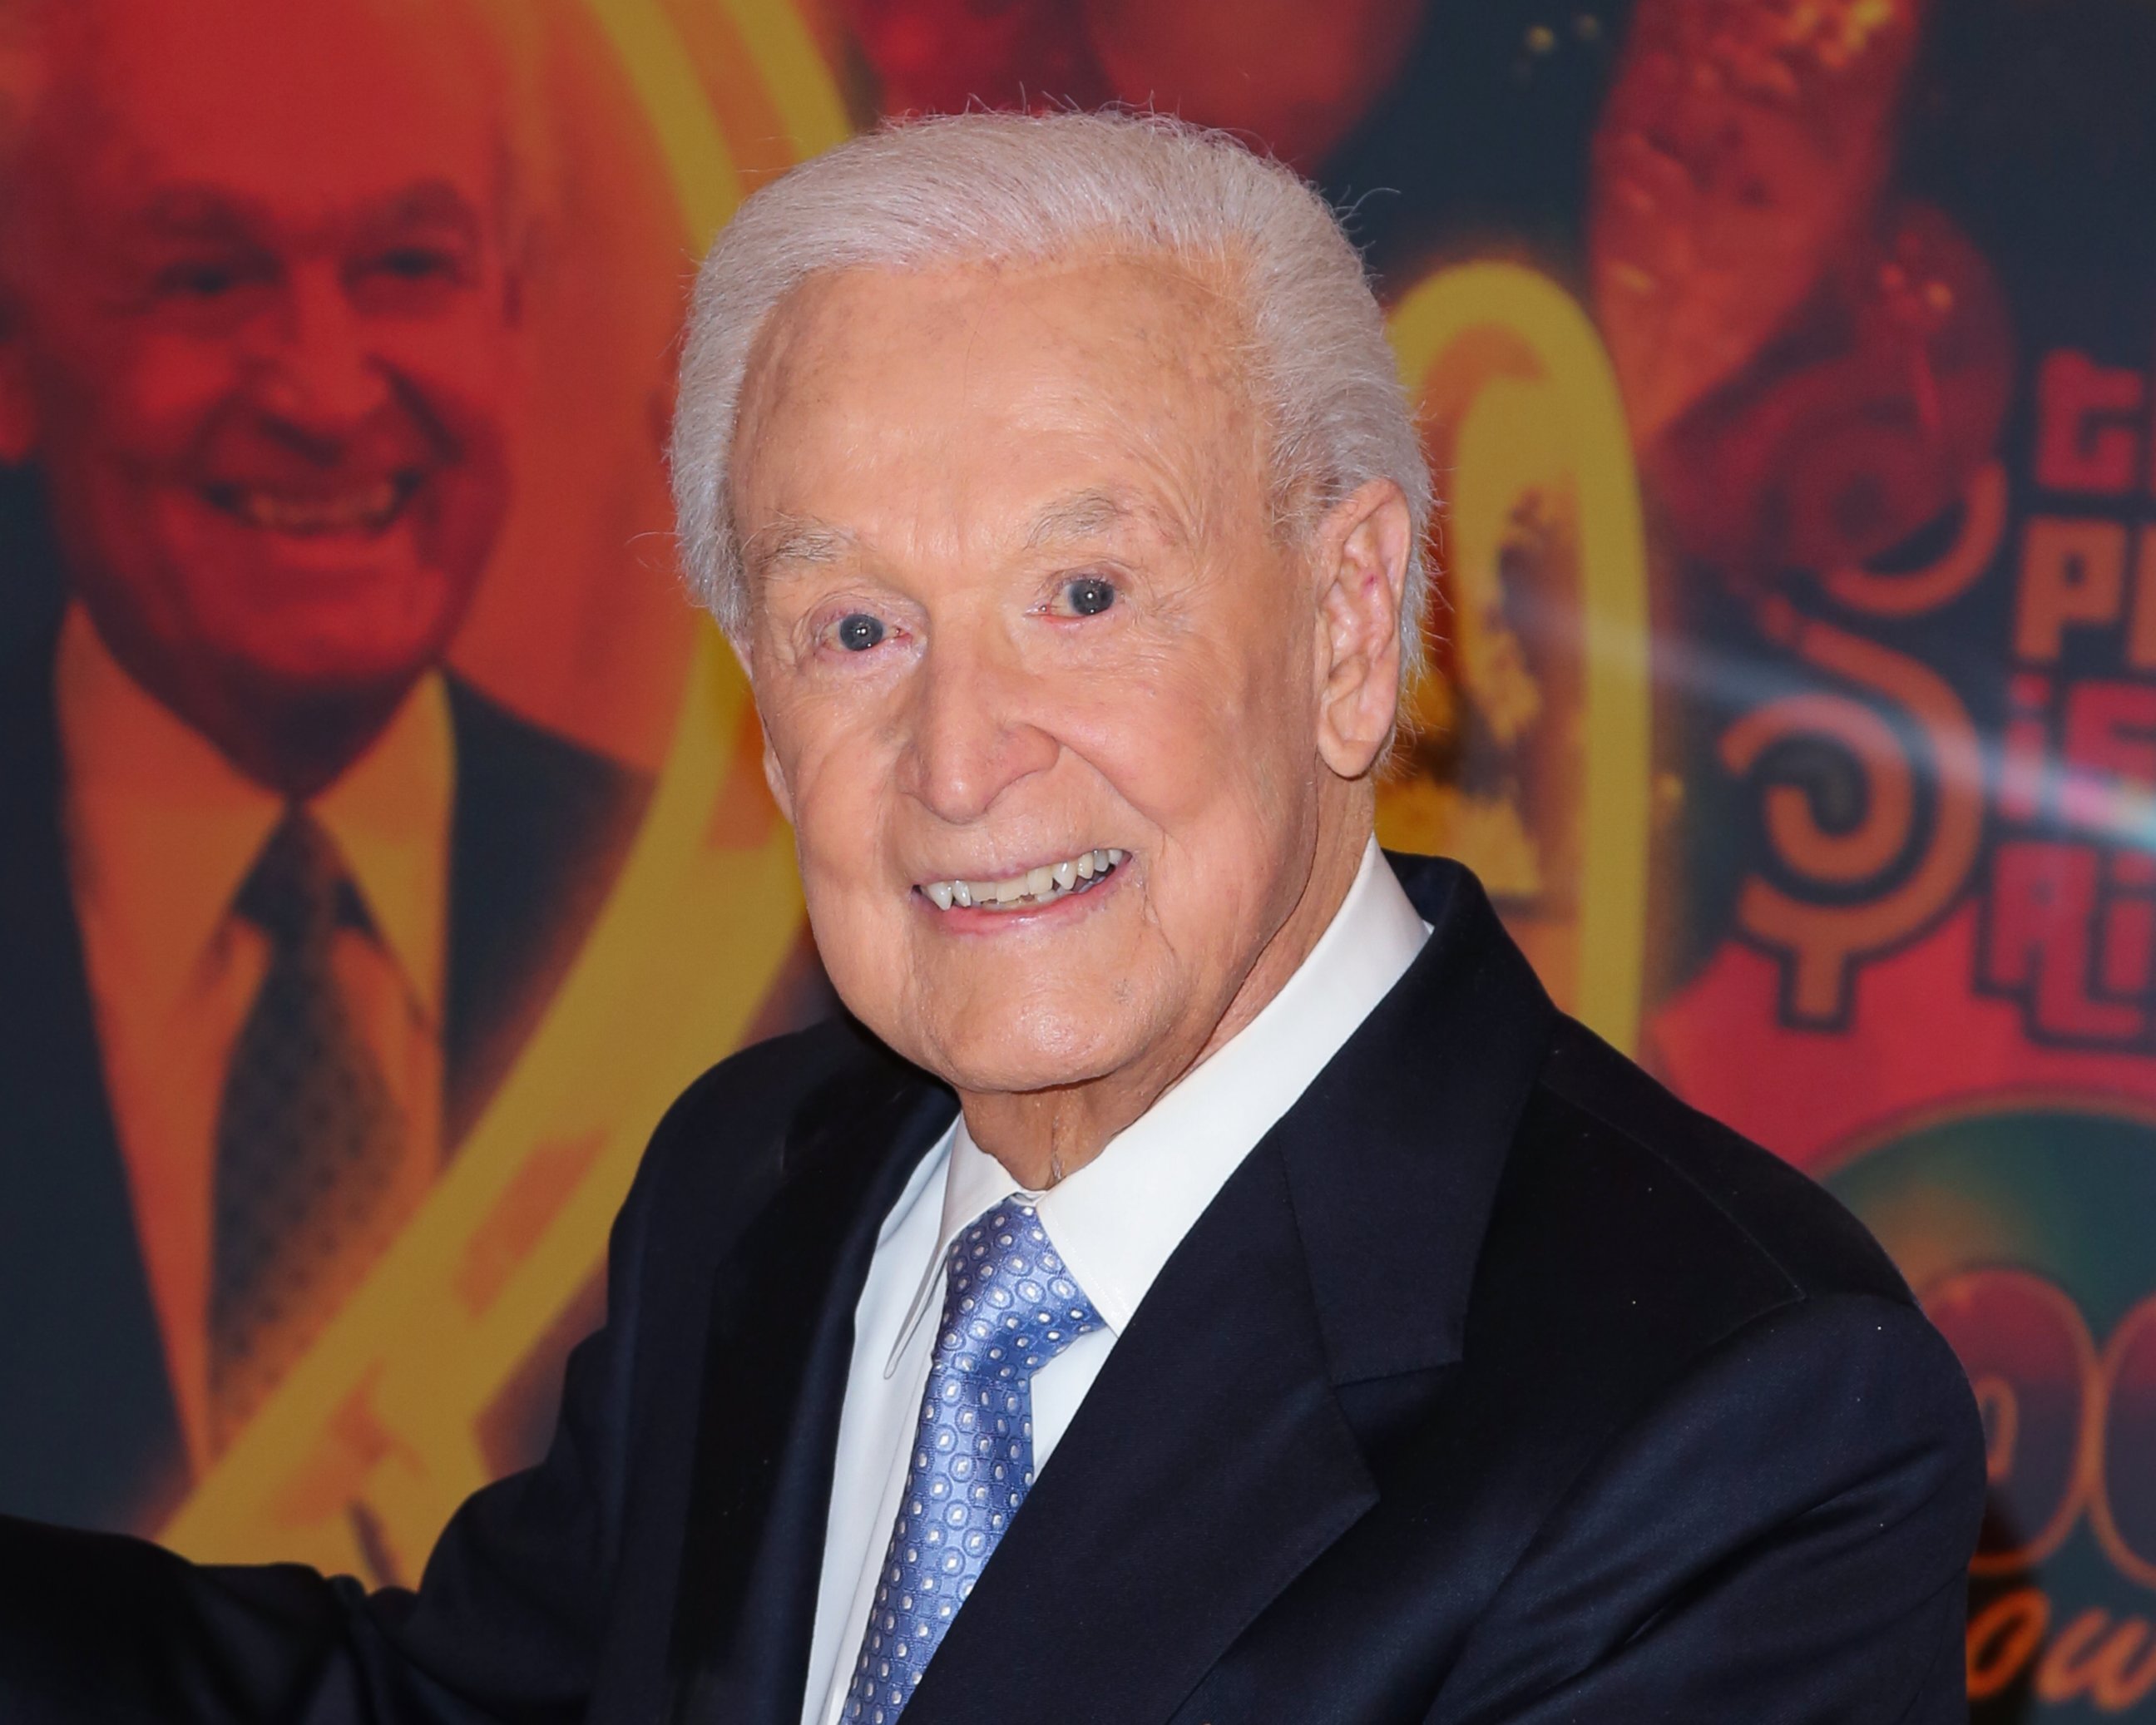 PHOTO: Bob Barker attends the set of "The Price Is Right" to celebrate his 90th Birthday at CBS Television City, Nov. 5, 2013, in Los Angeles, California.